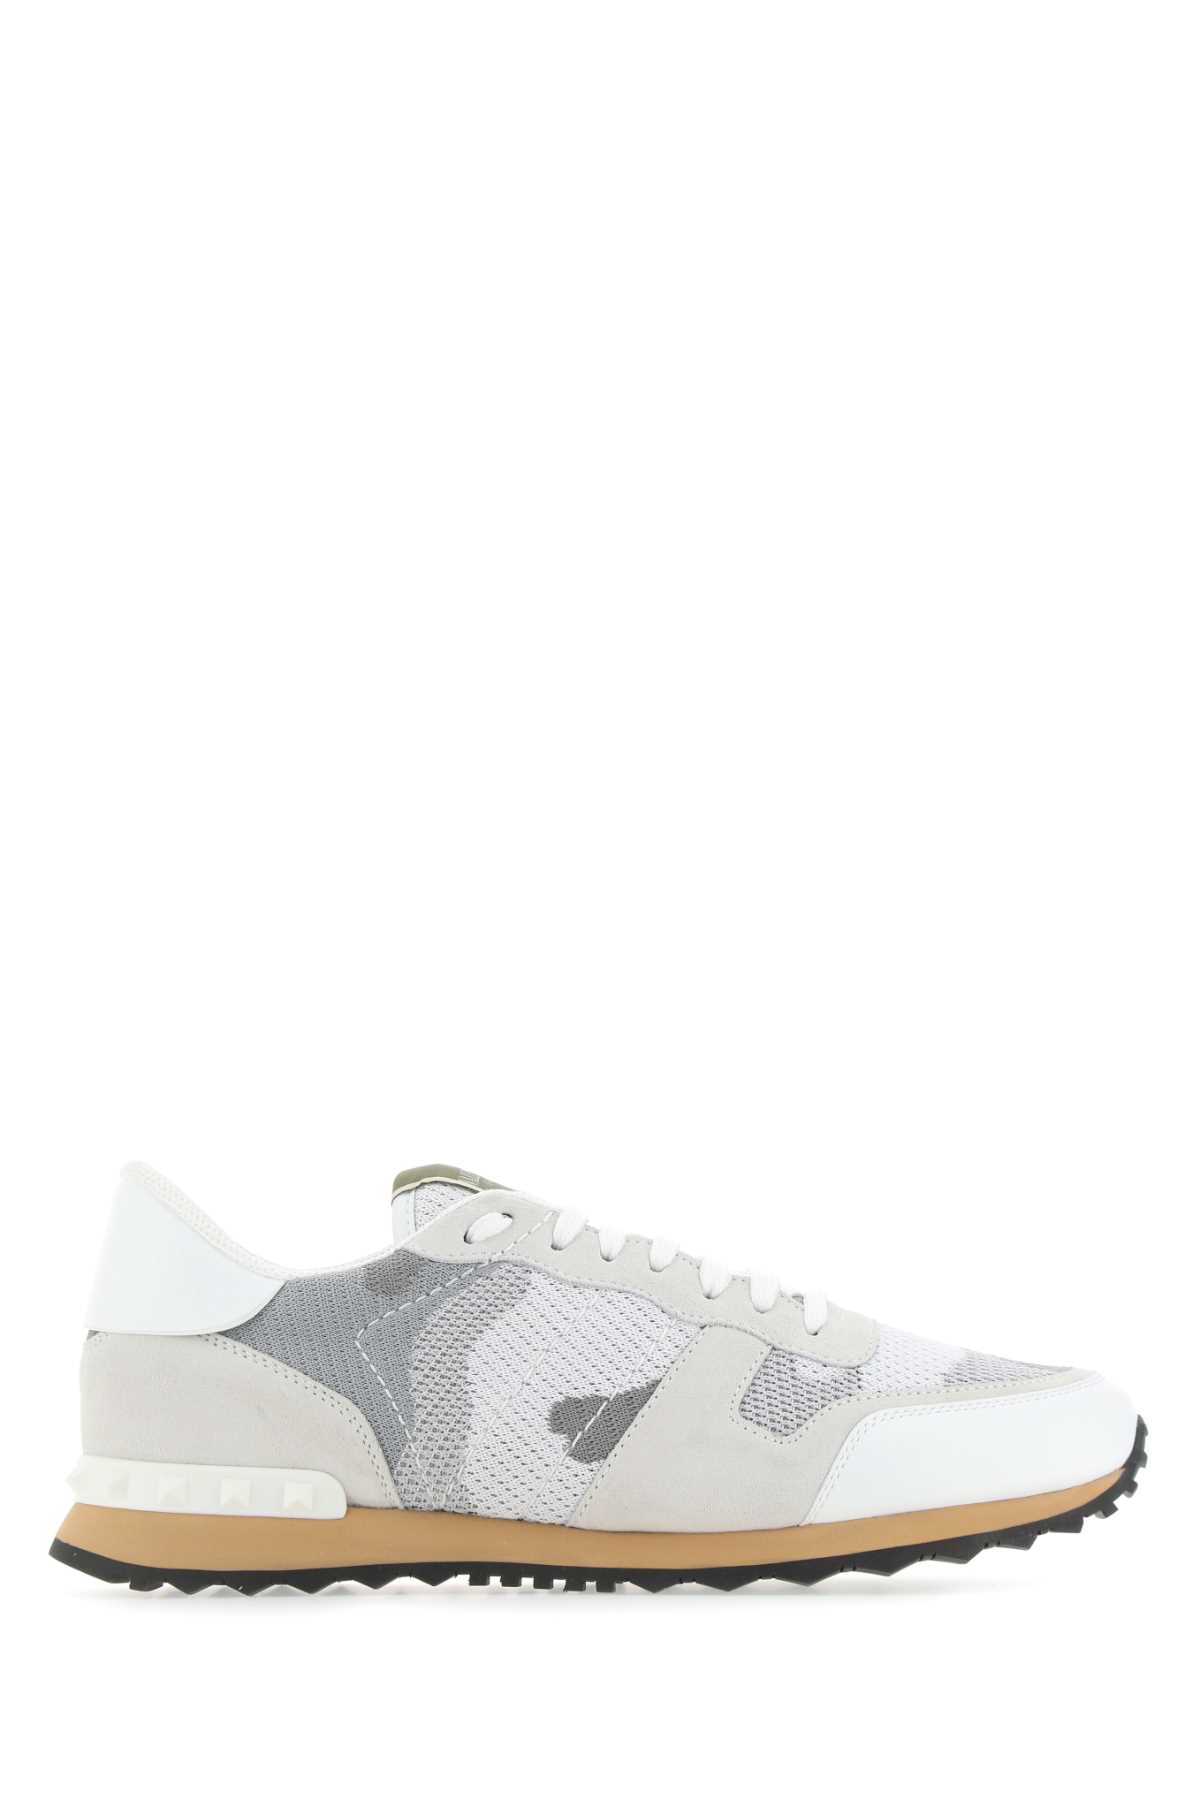 Shop Valentino Multicolor Leather And Fabric Rockrunner Camouflage Sneakers In Biancopastelgreybiancobiabeigebia